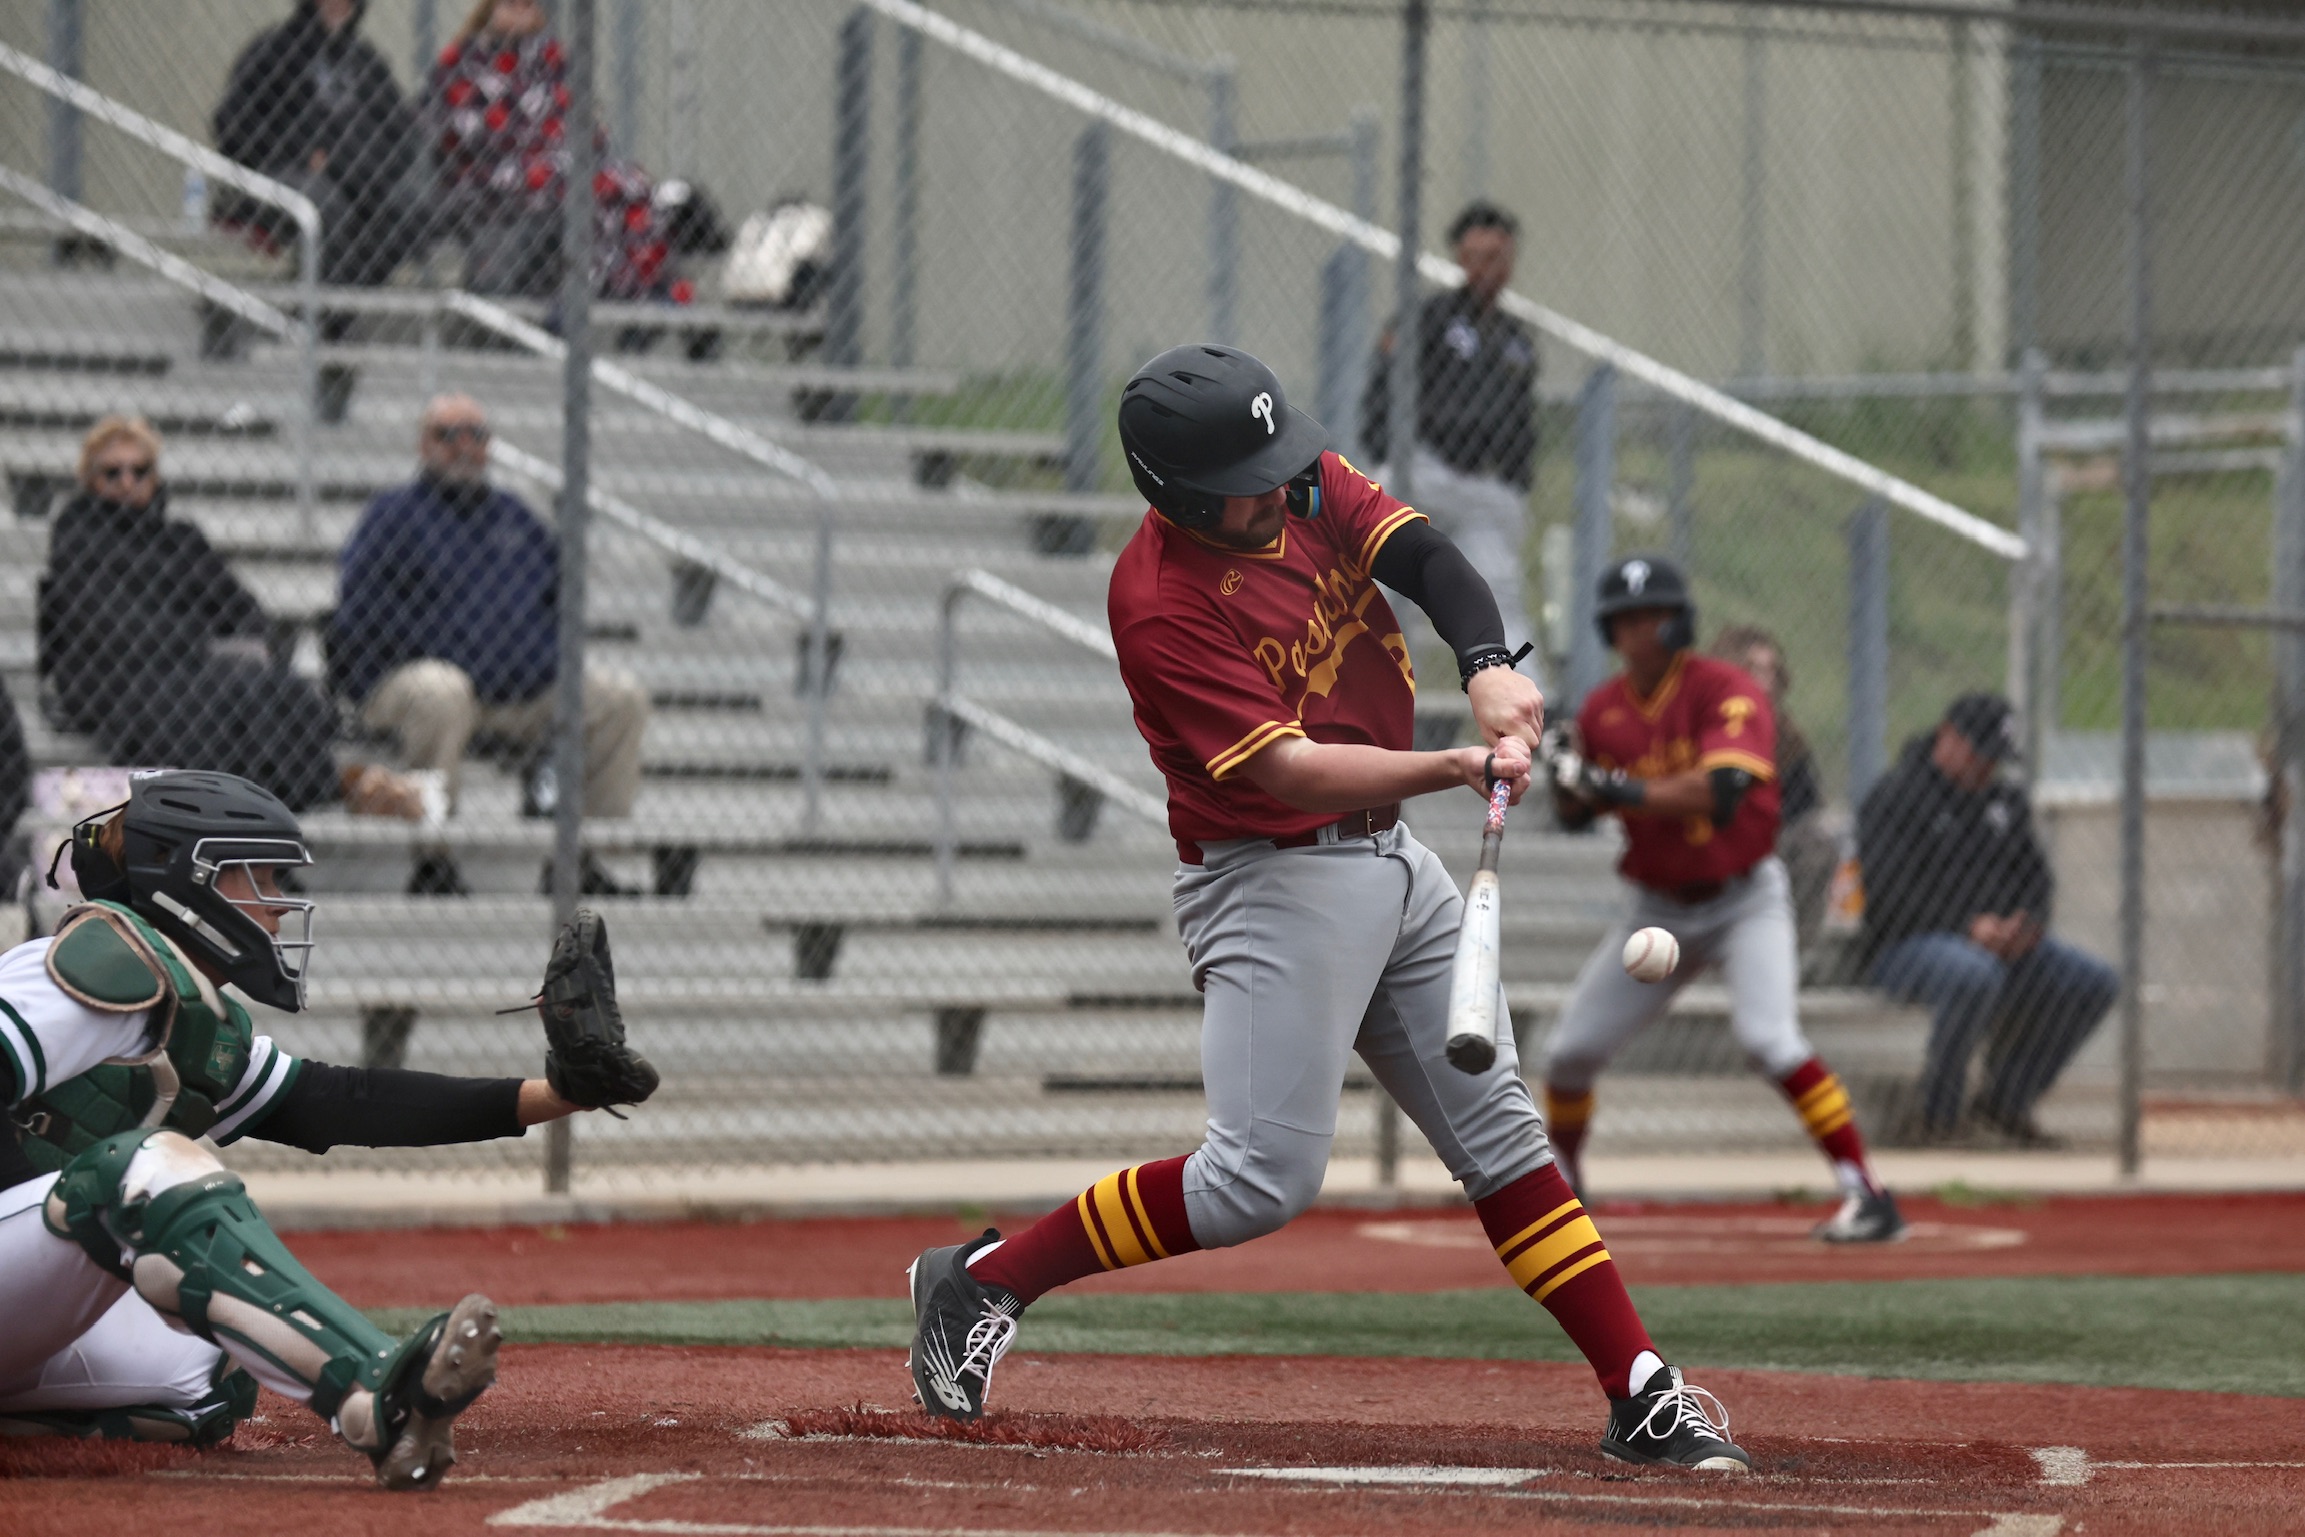 Jake Trabbie has helped Pasadena City College to a strong start to the SCC baseball season.